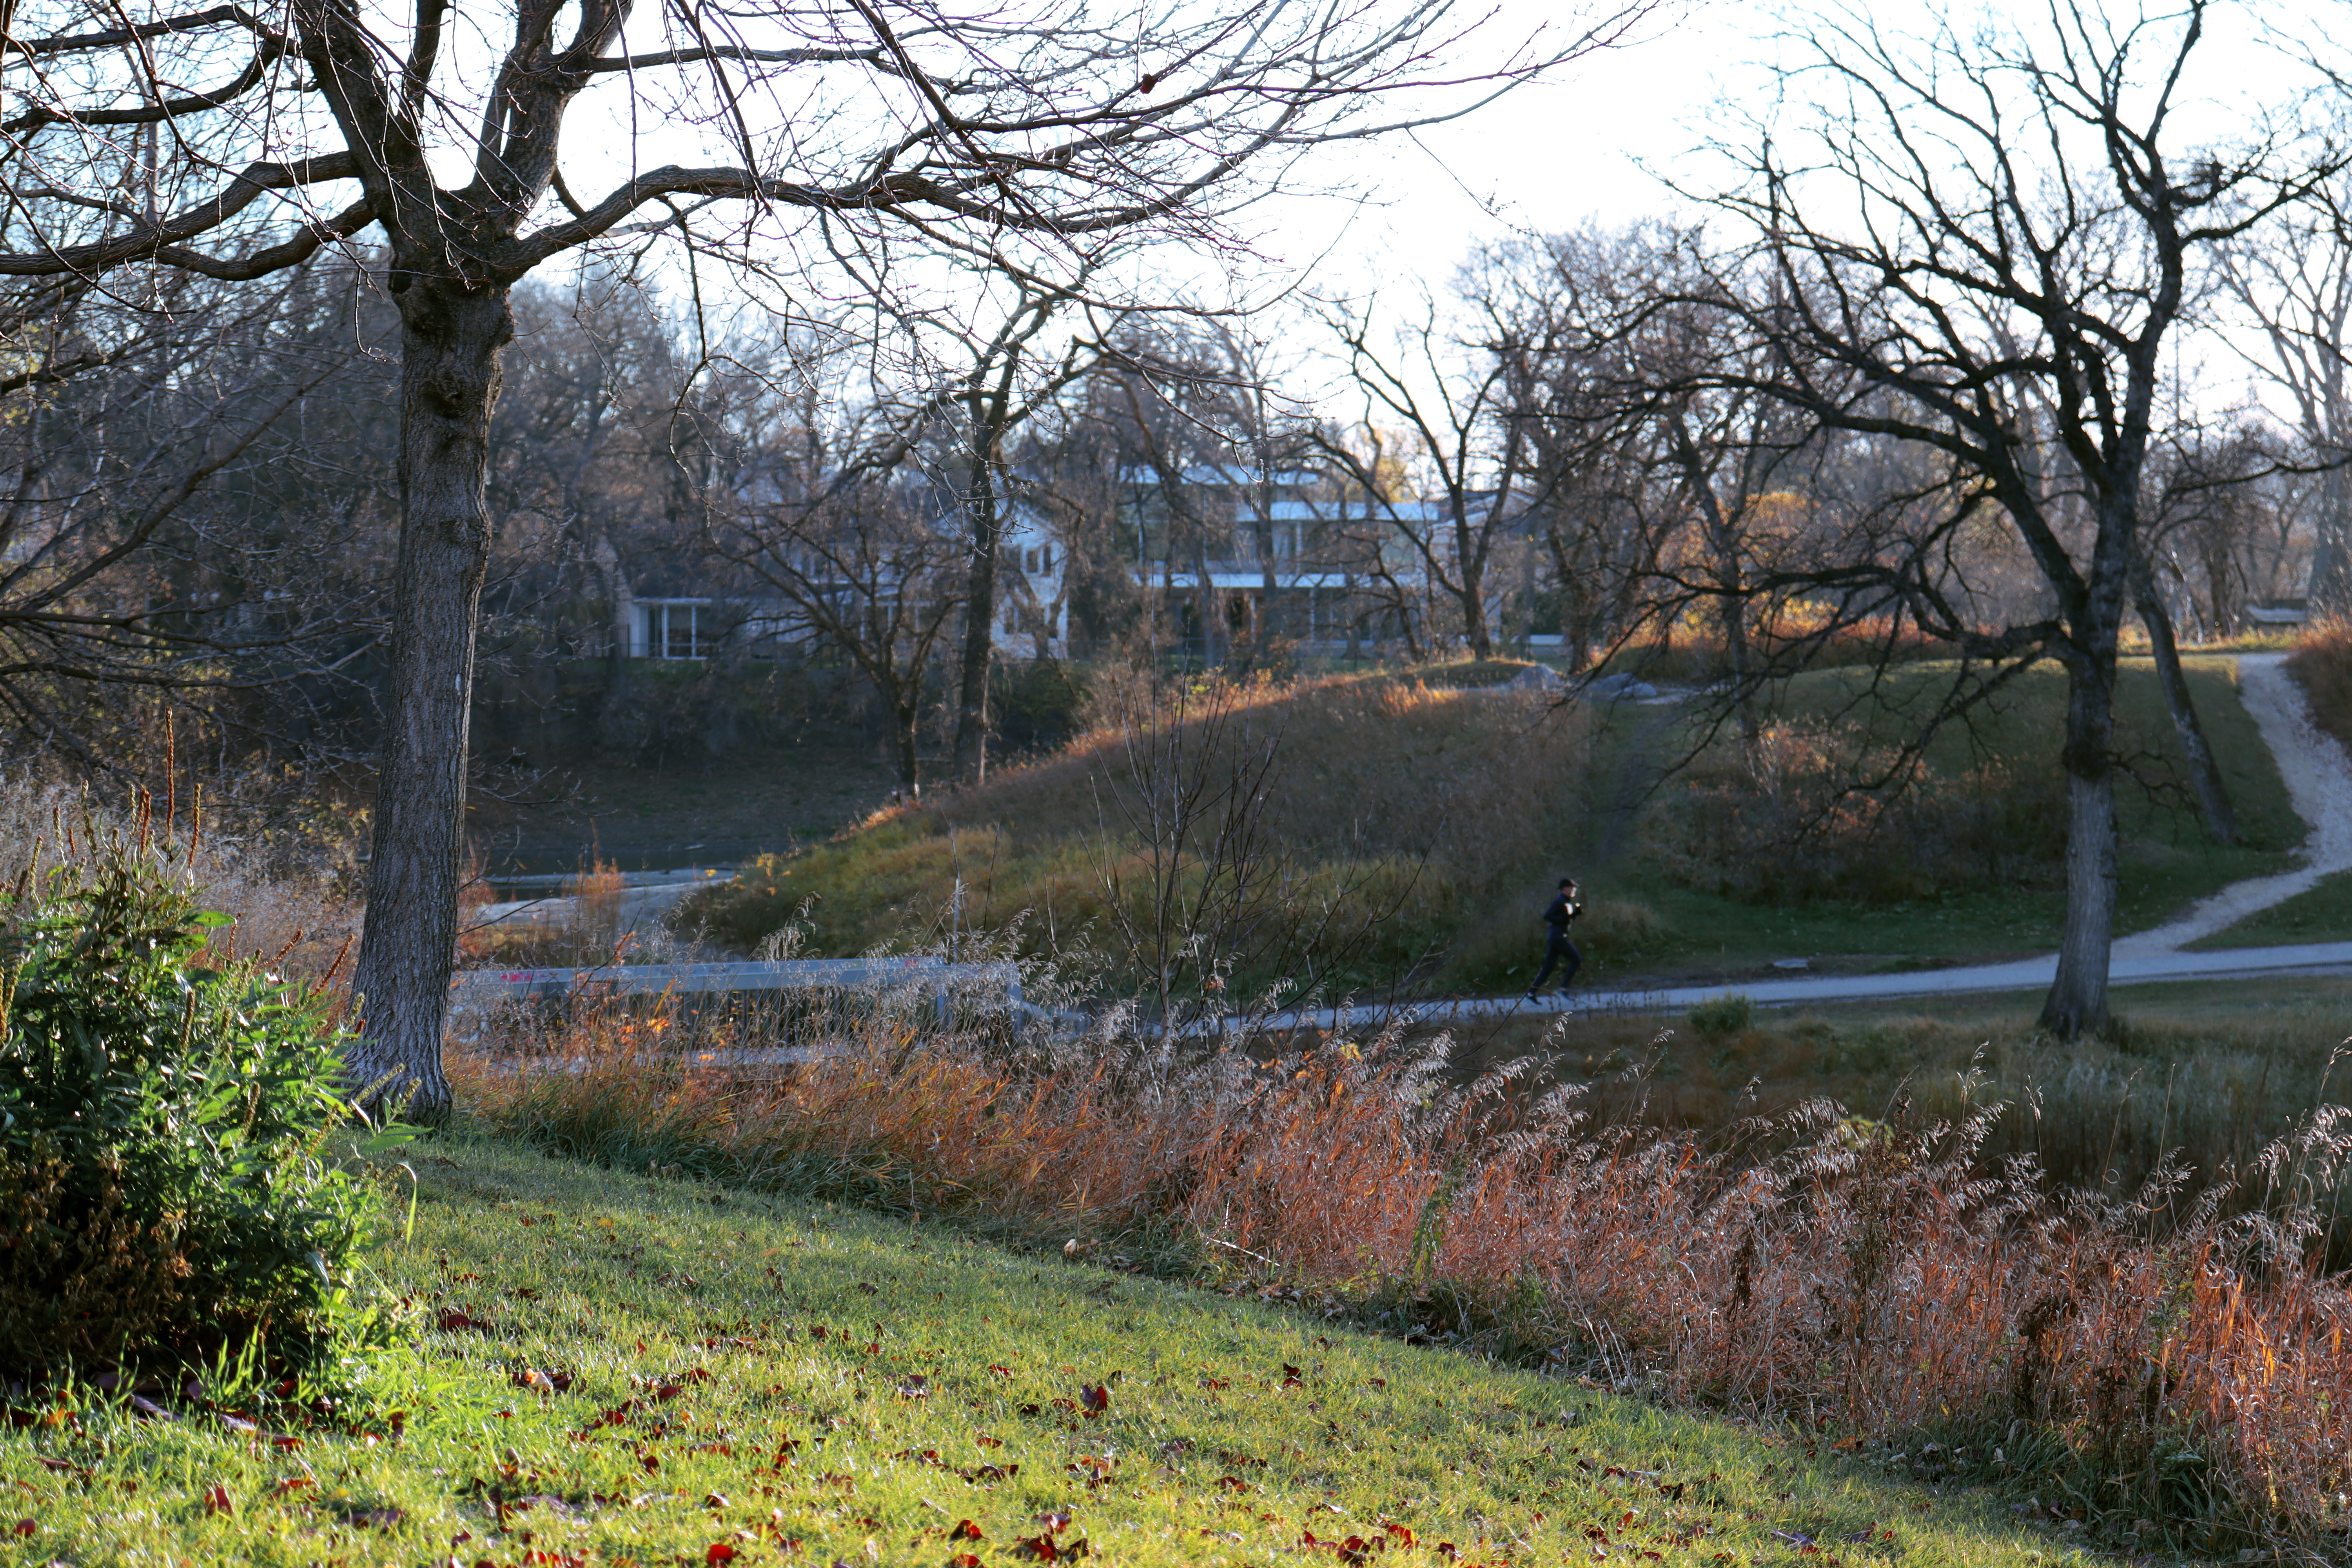 Green grass and reddish brush is visible along a creek in a fall image of aWinnipeg park